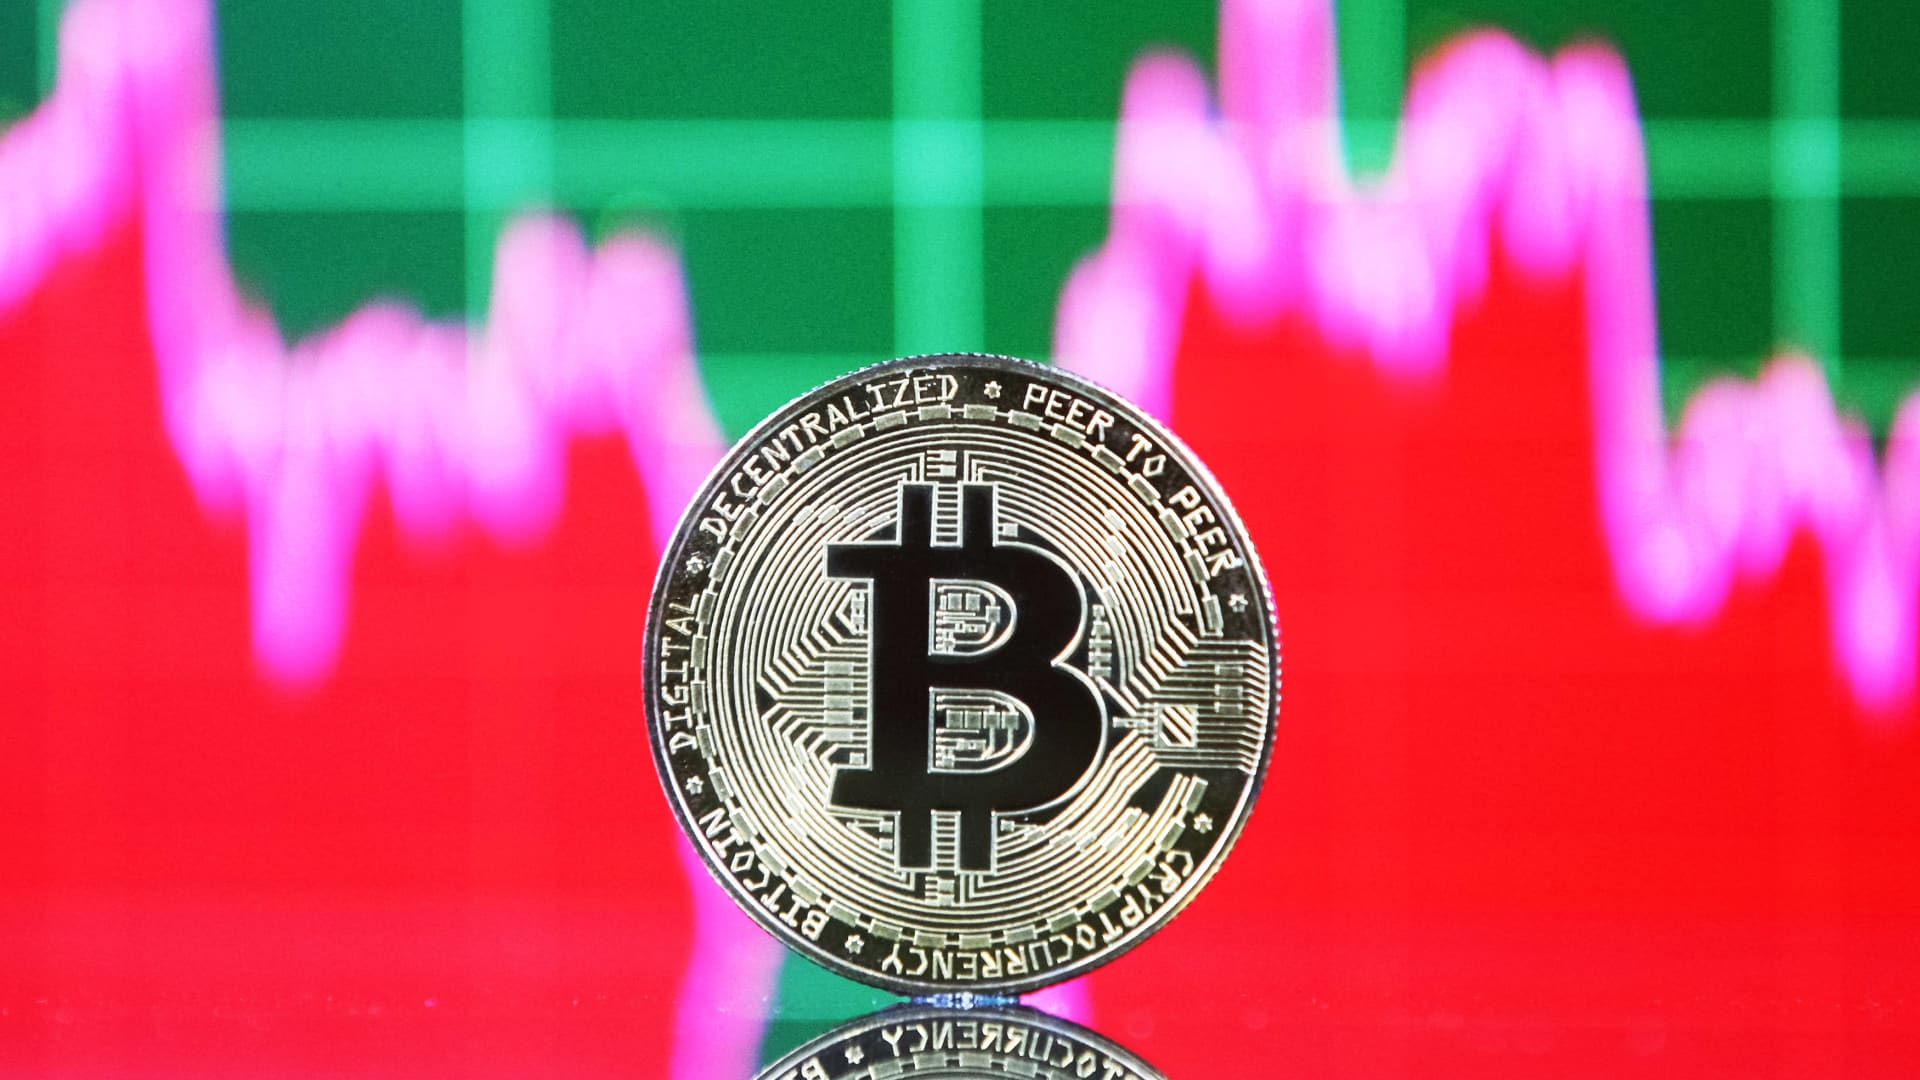 Bitcoin (BTC) price surges to top $20,000 even as stocks hit 2022 lows